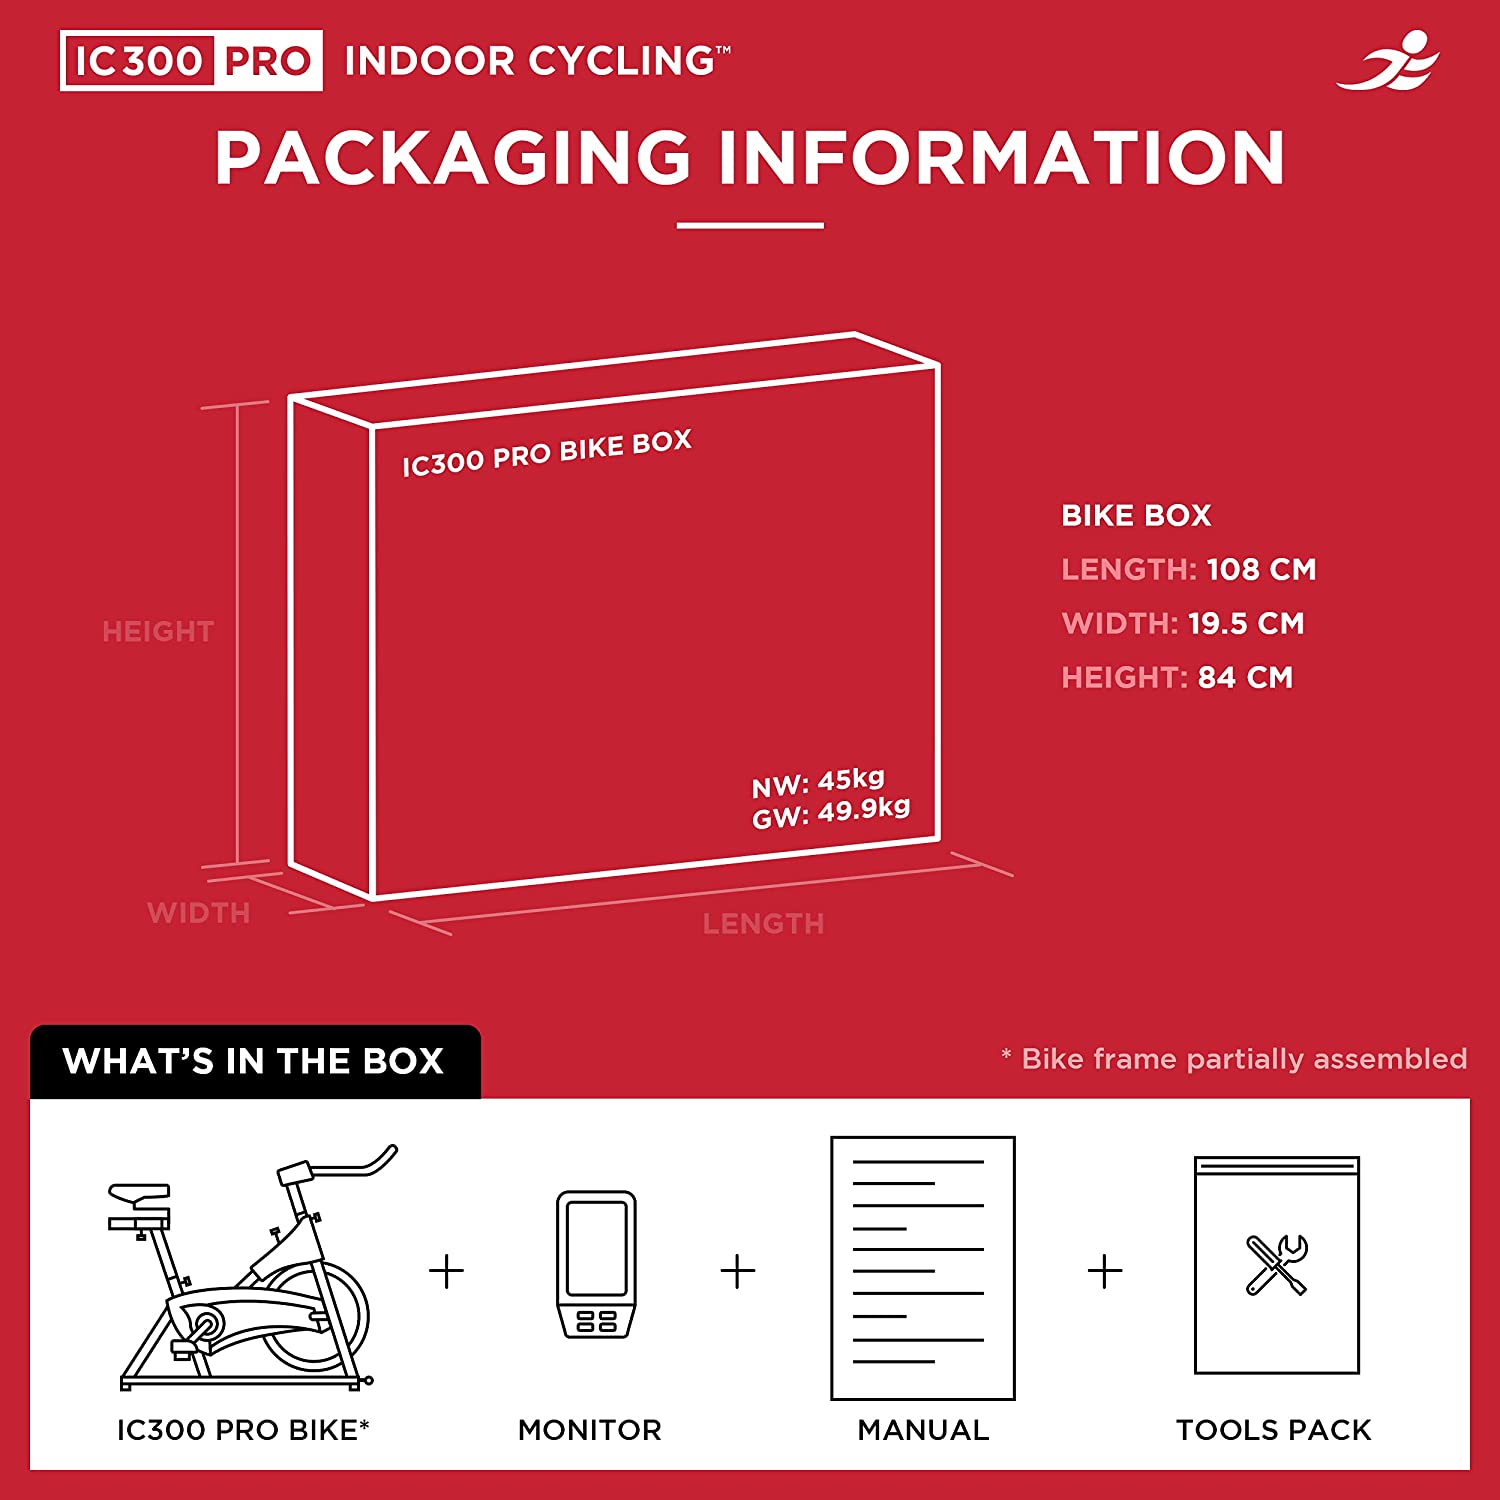 JLL IC300 Pro Indoor Cycling Exercise Bike - Packaging Information